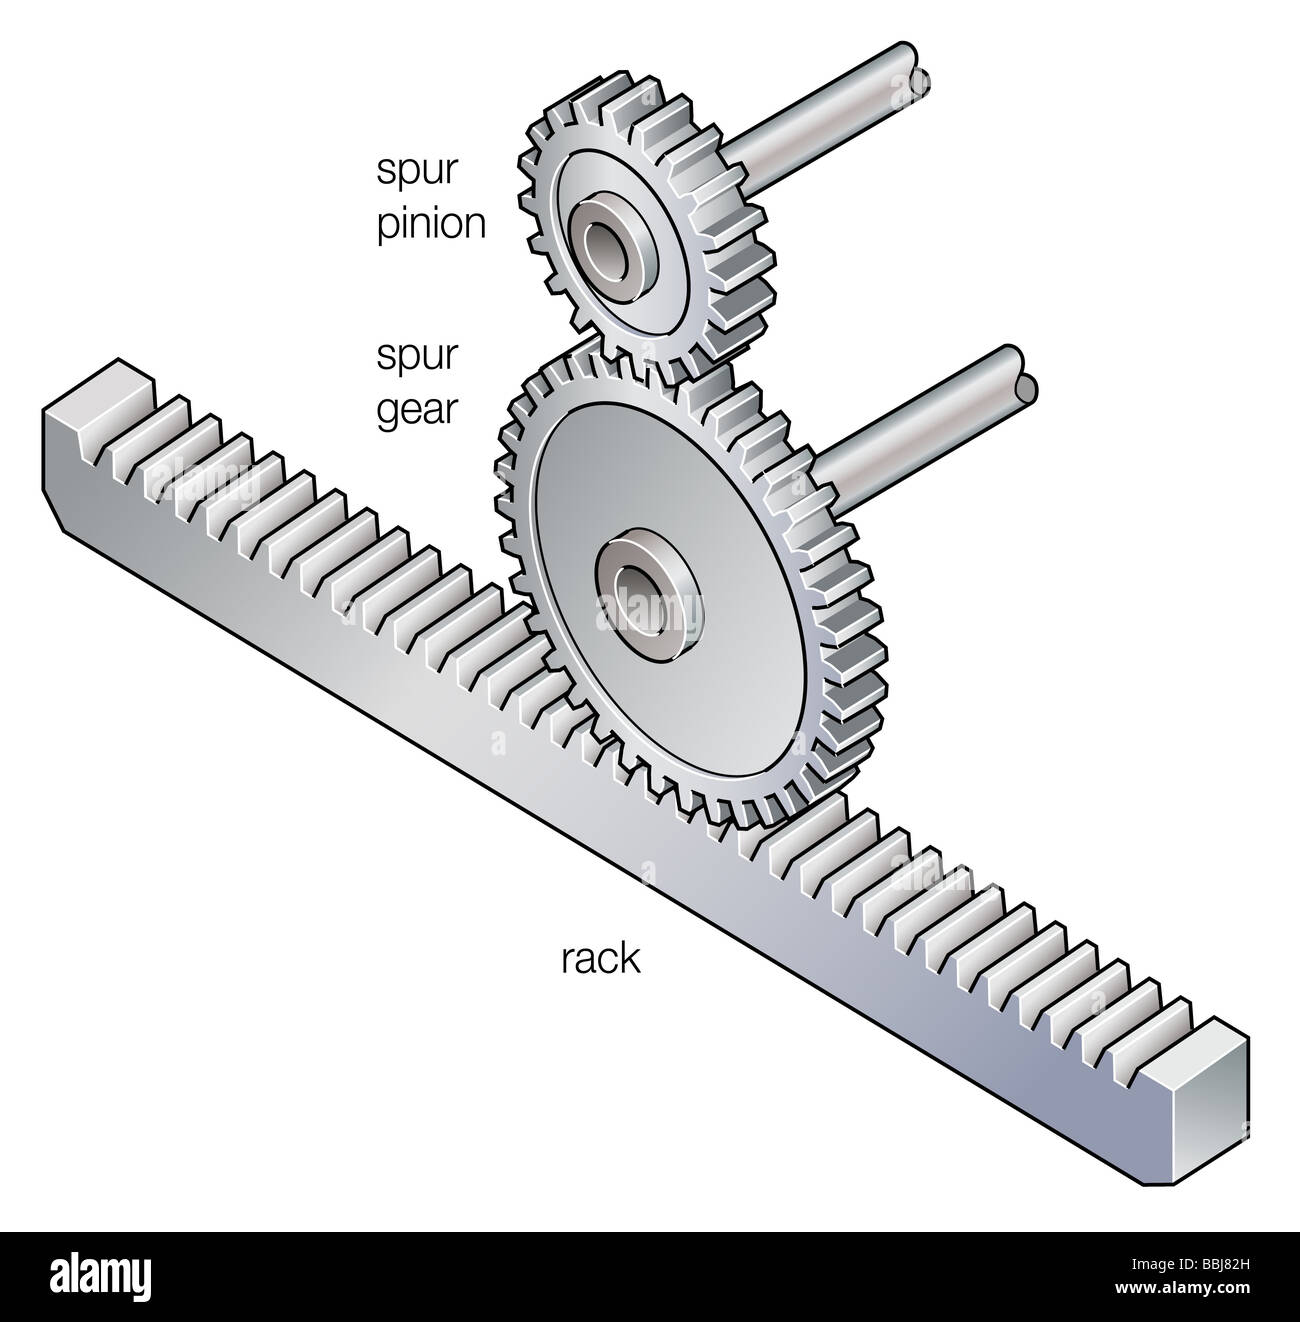 How to Create a Spur Gear in SolidWorks - 12CAD.com